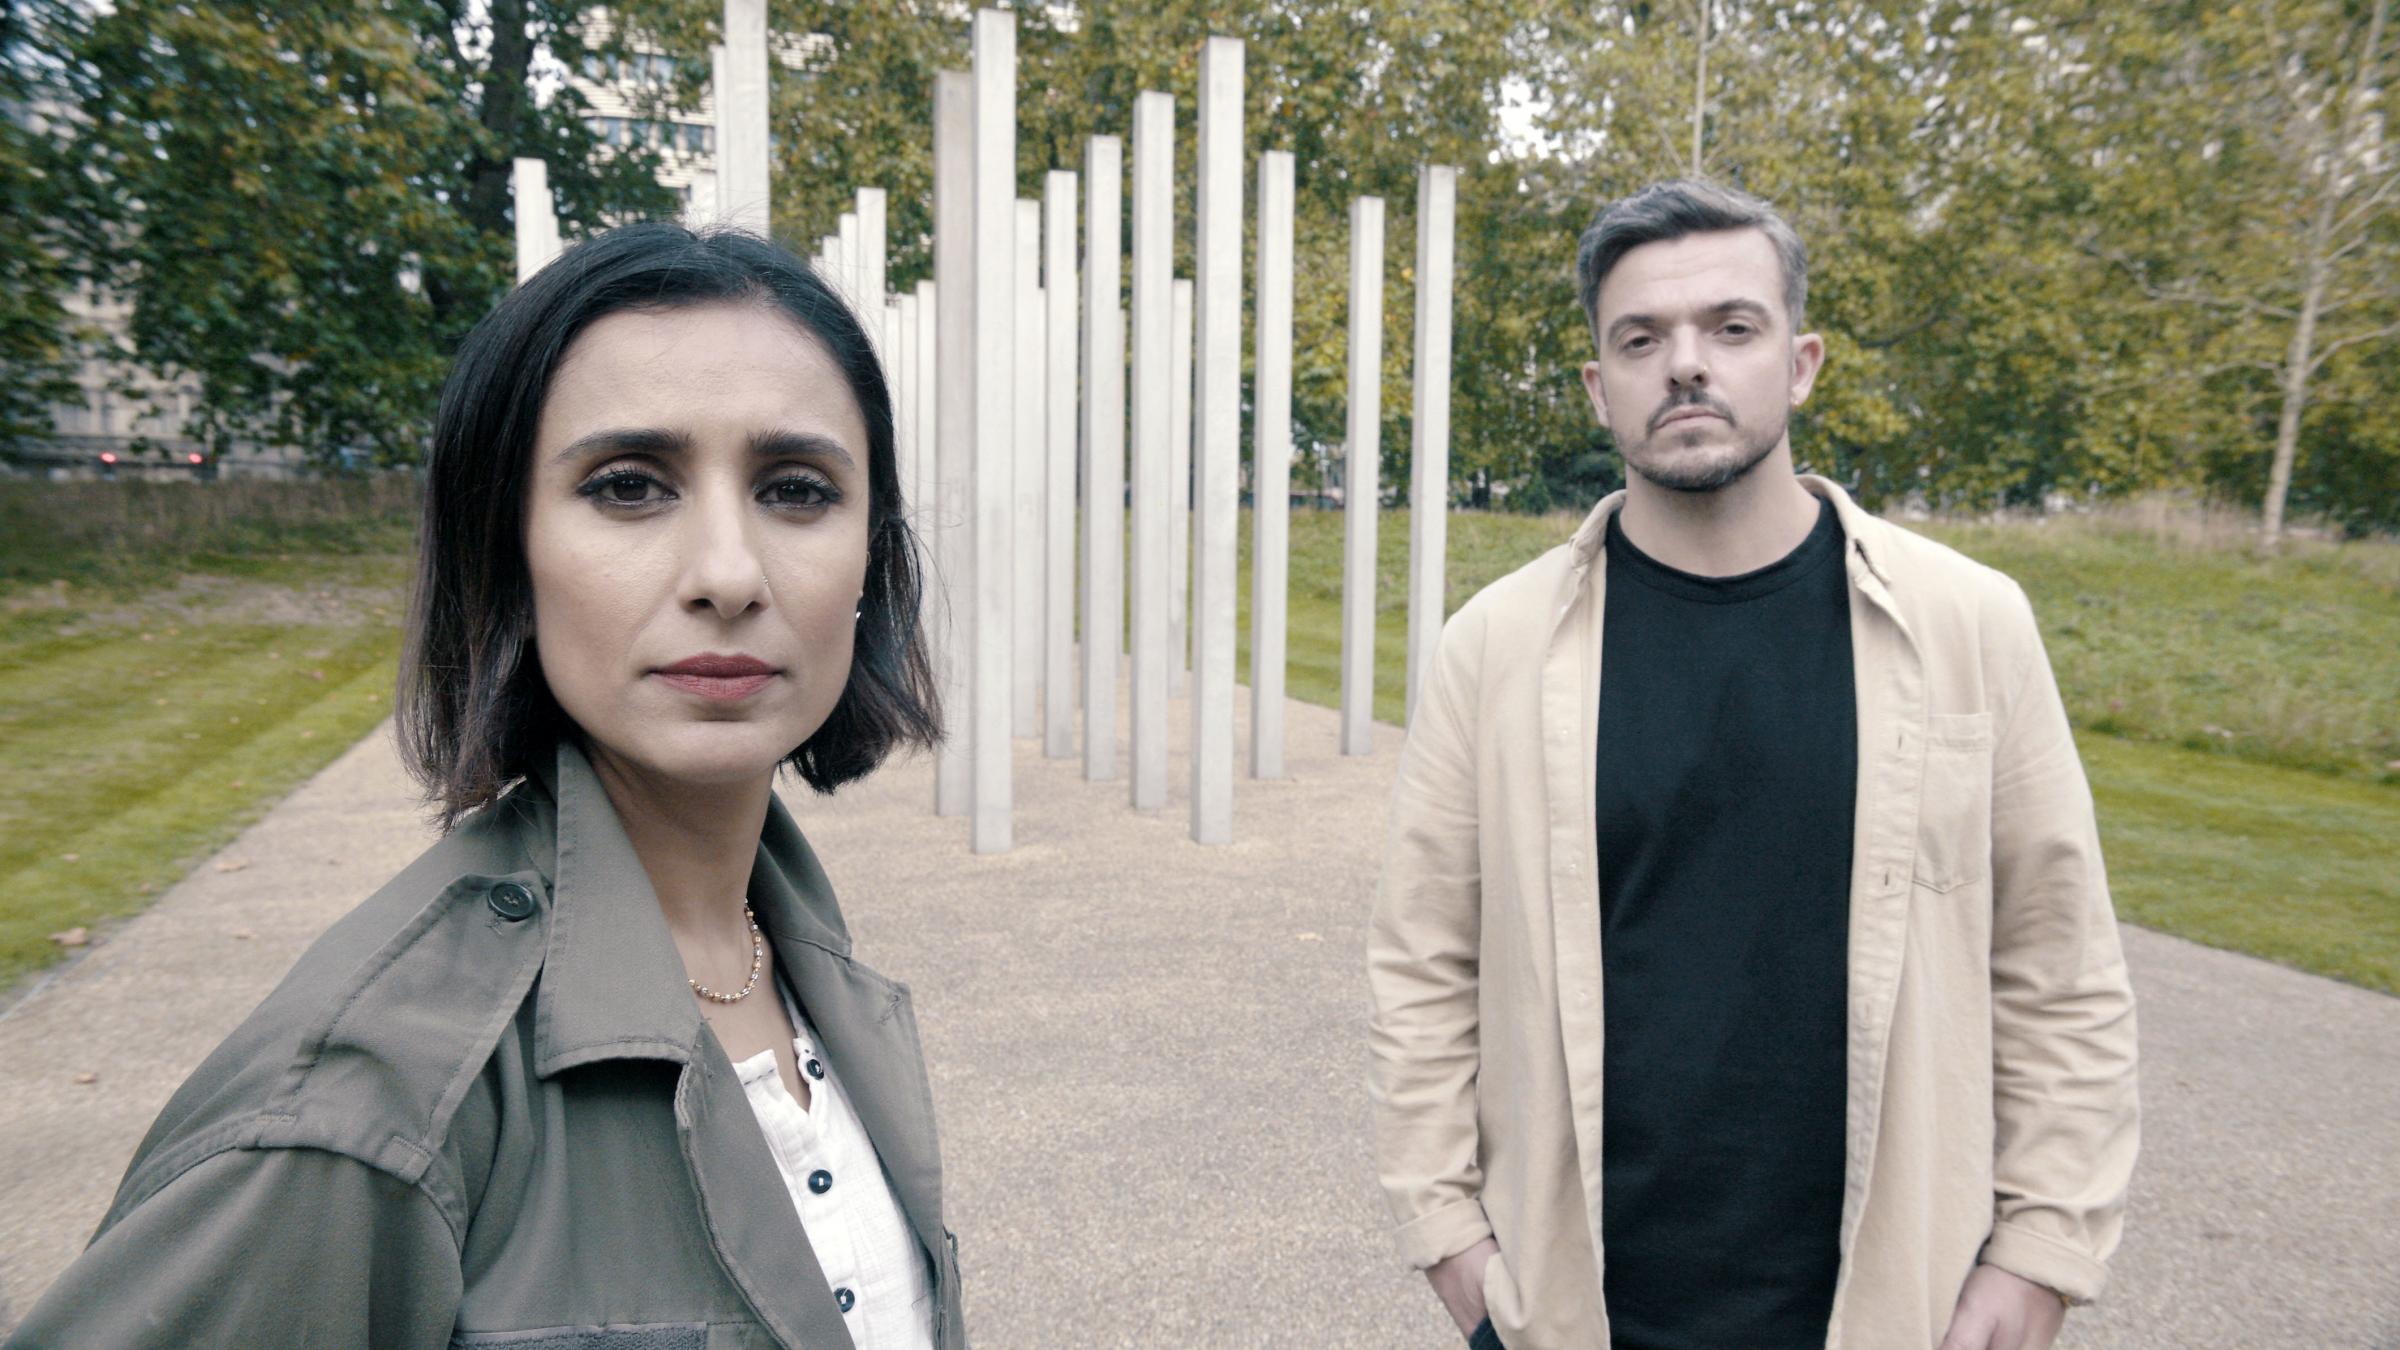 Saved By a Stranger: Anita Rani with Karl, who was a passenger on the first carriage of the Piccadilly Line London Underground train – one of the four targets of the 7/7 bombings – and has been looking for the mystery woman who comforted him